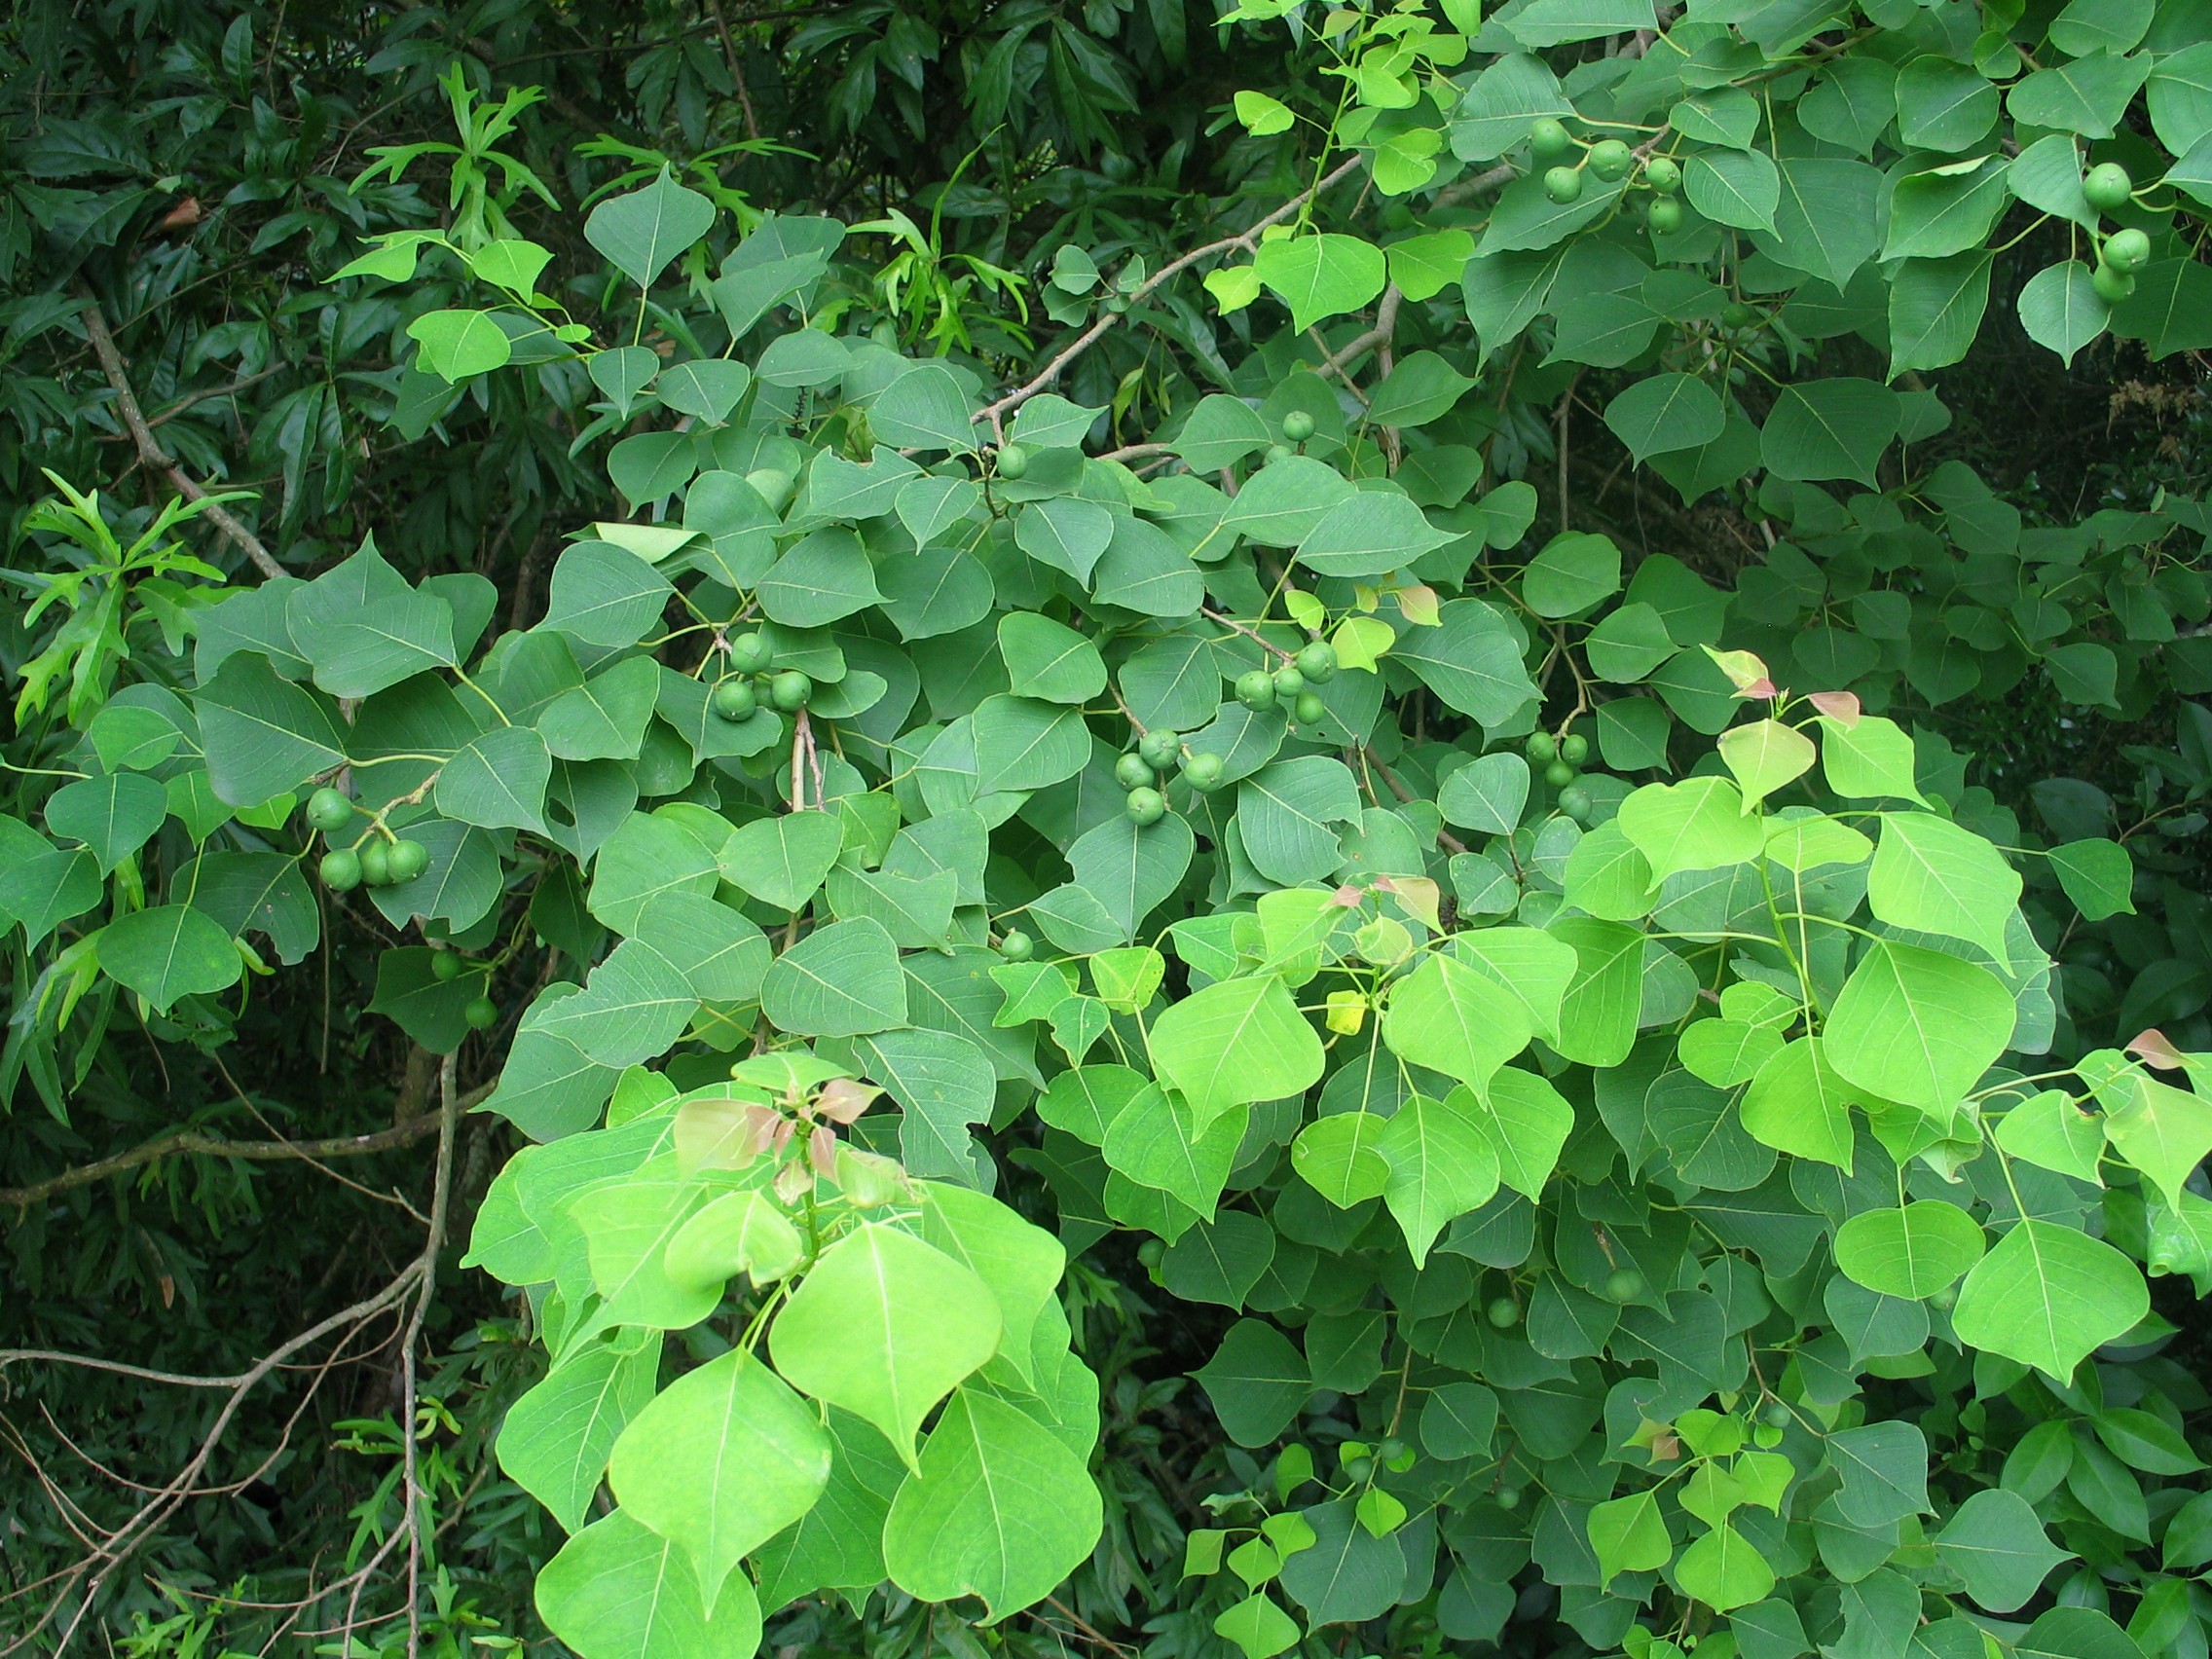 Chinese Tallow Tree - (Photo Courtesy of James Henson, hosted by the USDA-NRCS PLANTS Database)